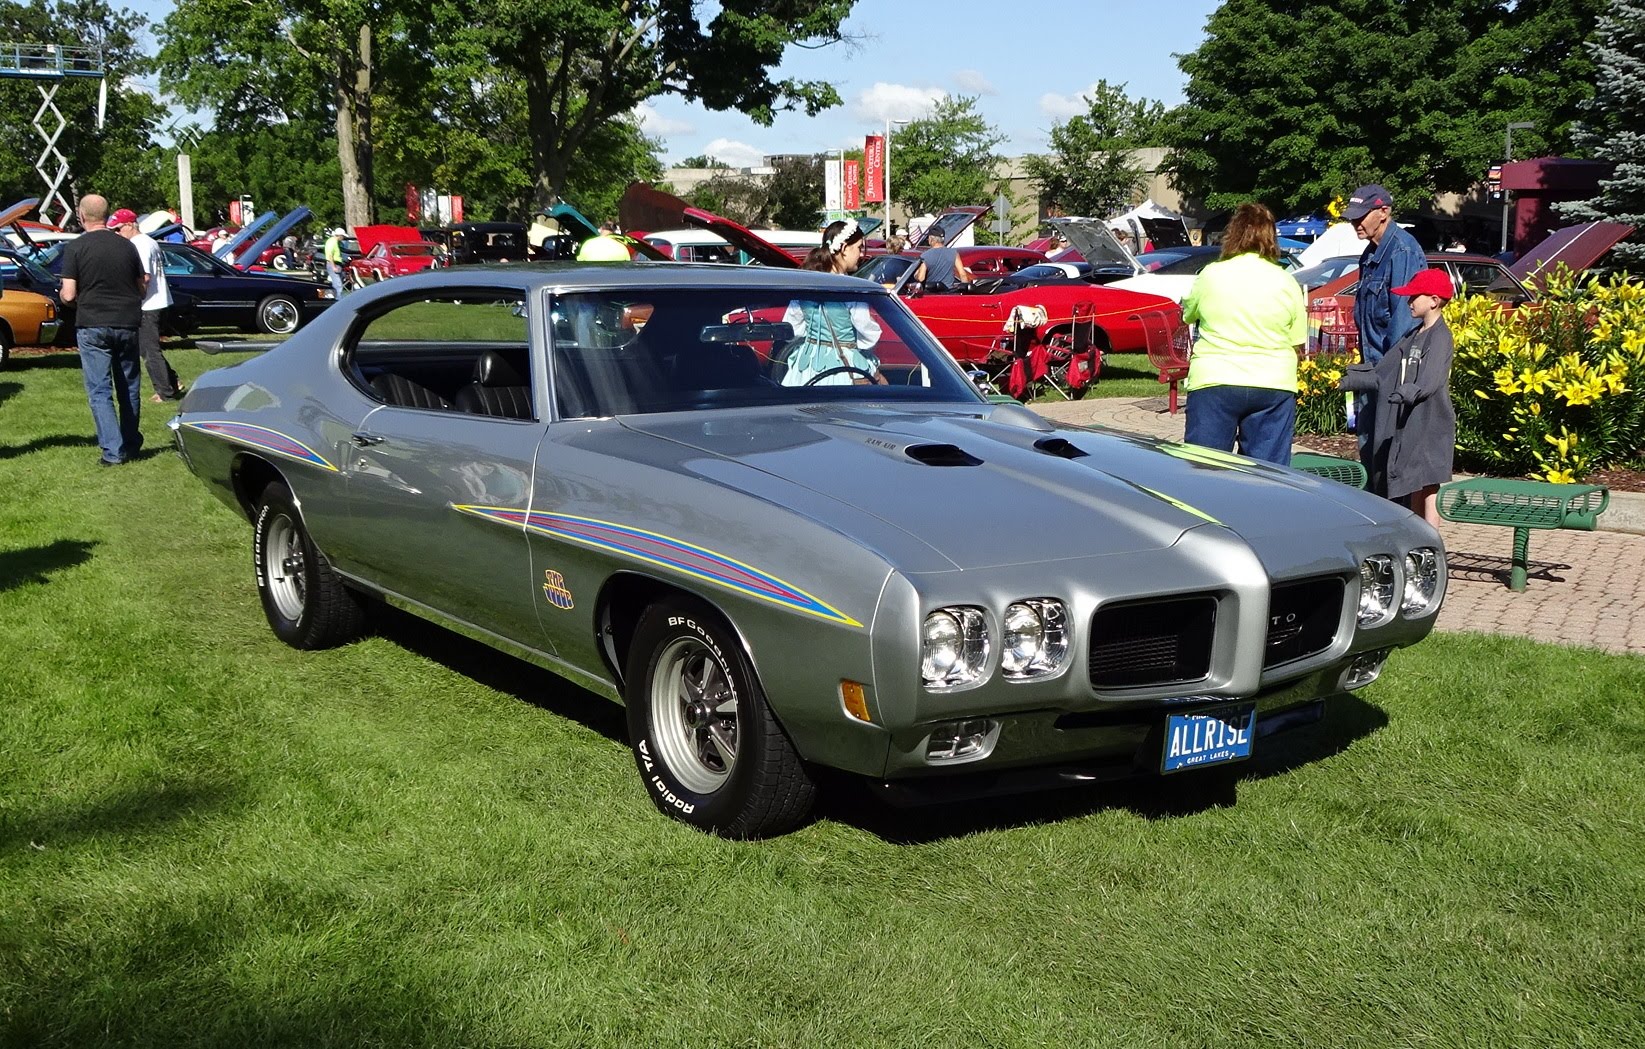 Also, one of my favorite stripe executions was also a GTO, but the 70 Judge...